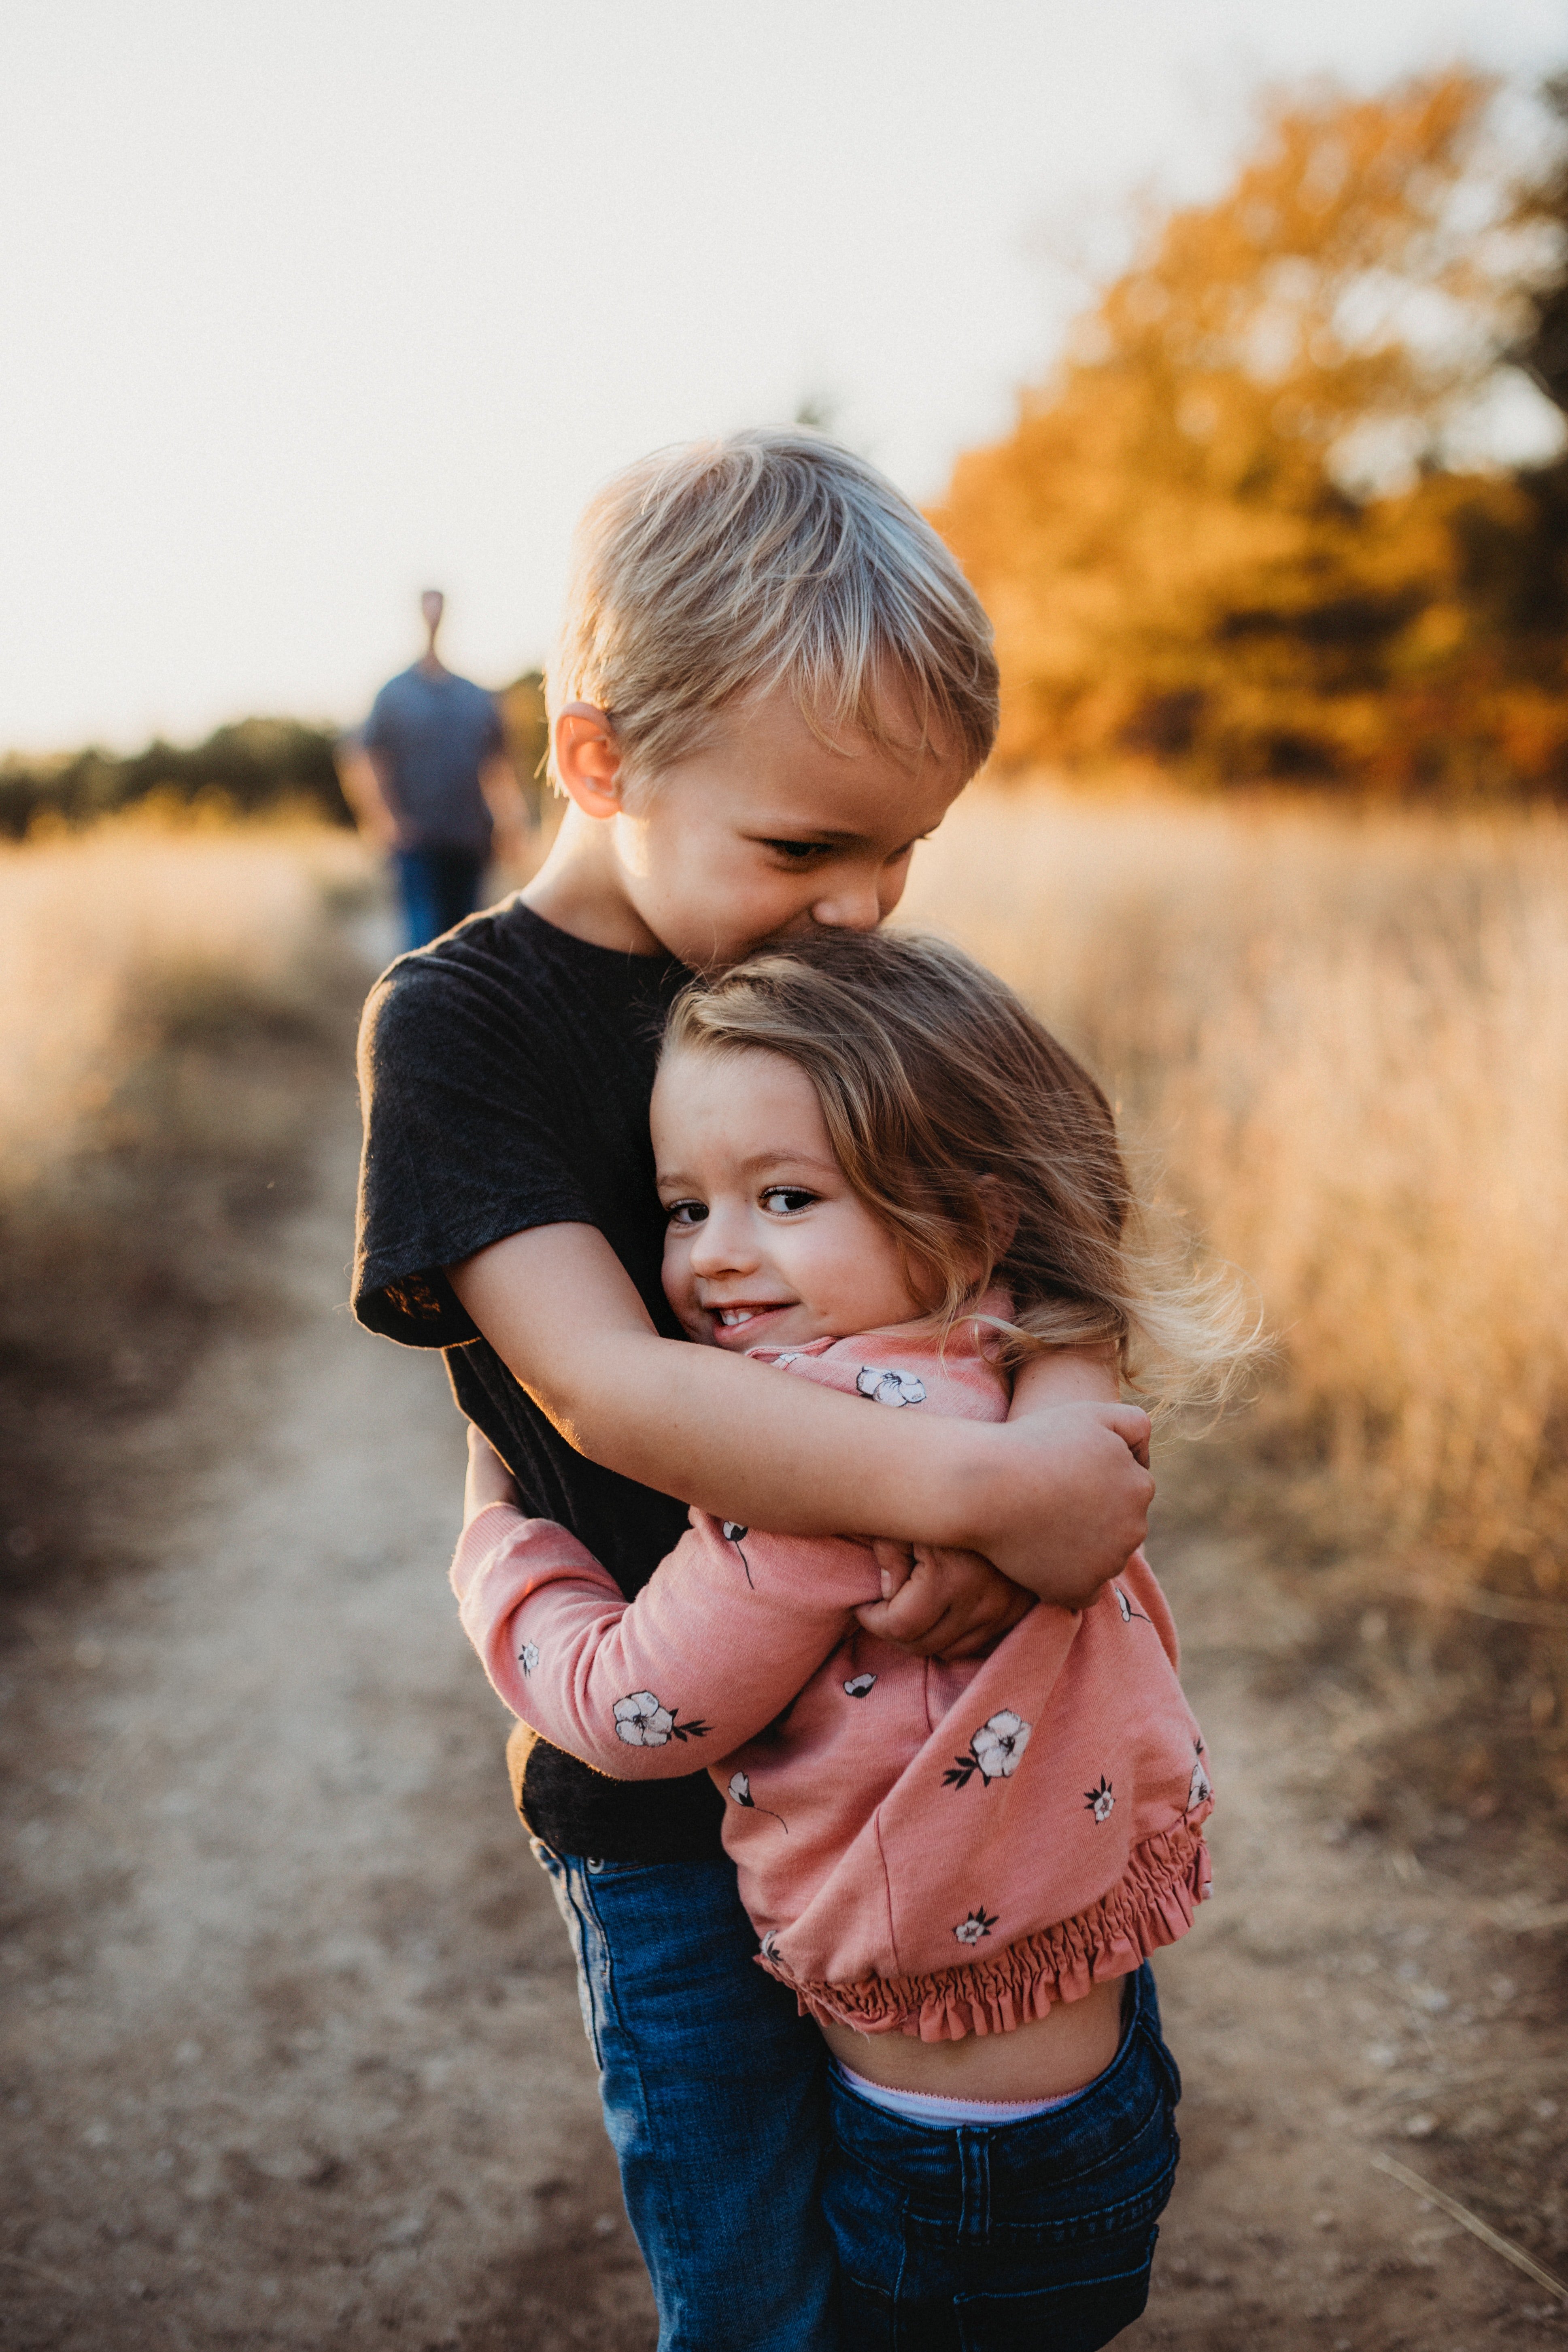 Courtney became Tommy and Claire's big sister. | Source: Unsplash